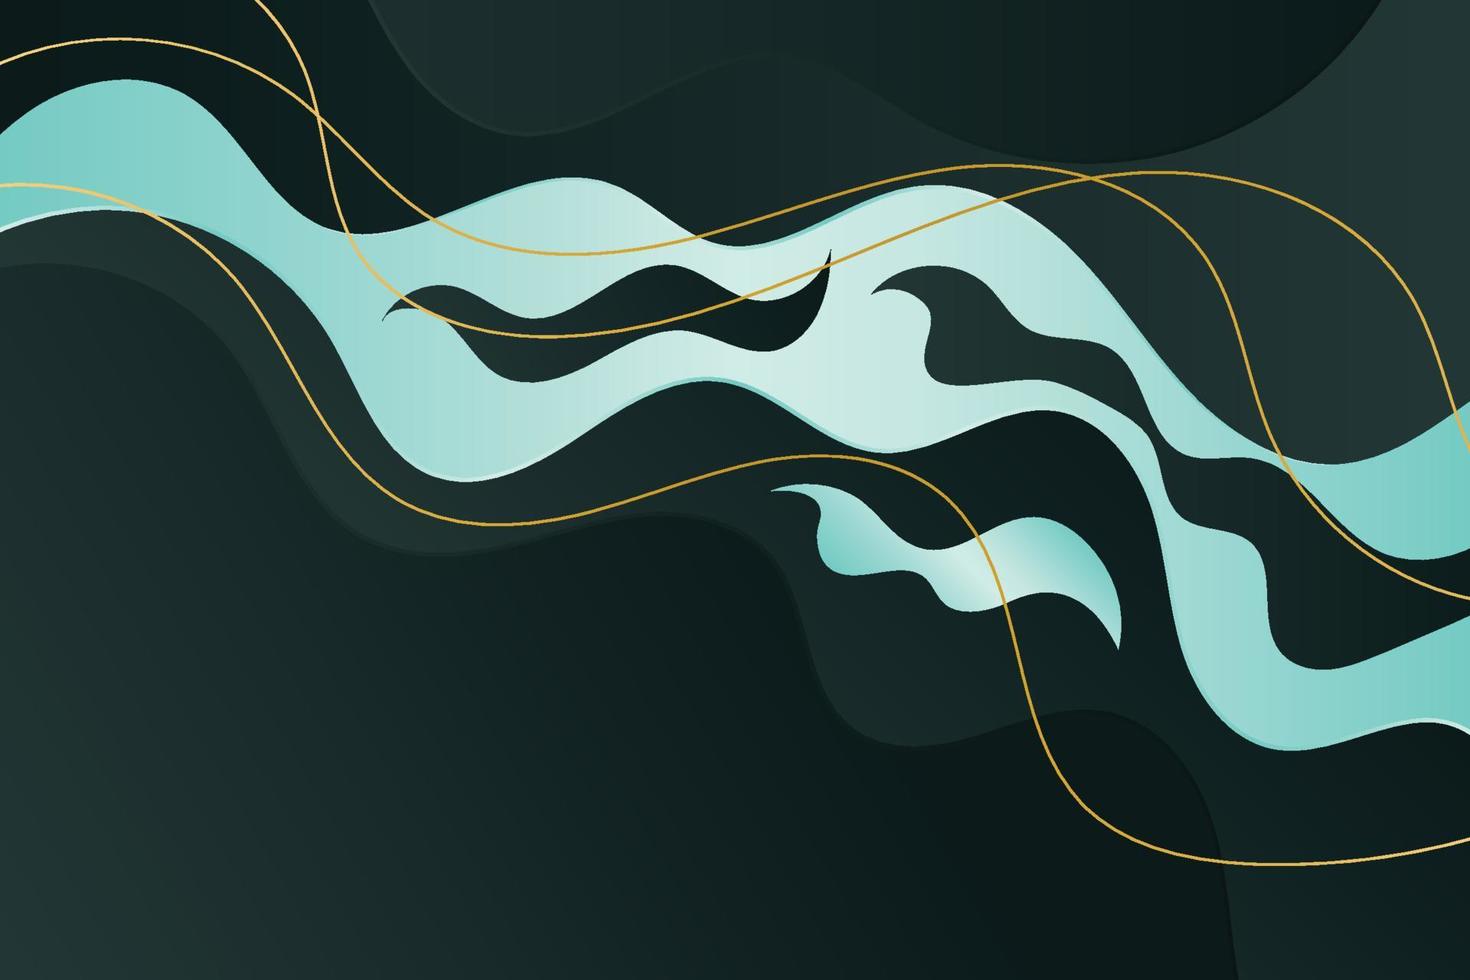 Abstract dark background with shiny lines and waves. Vector design template for banner, advertising, poster, cover and presentation